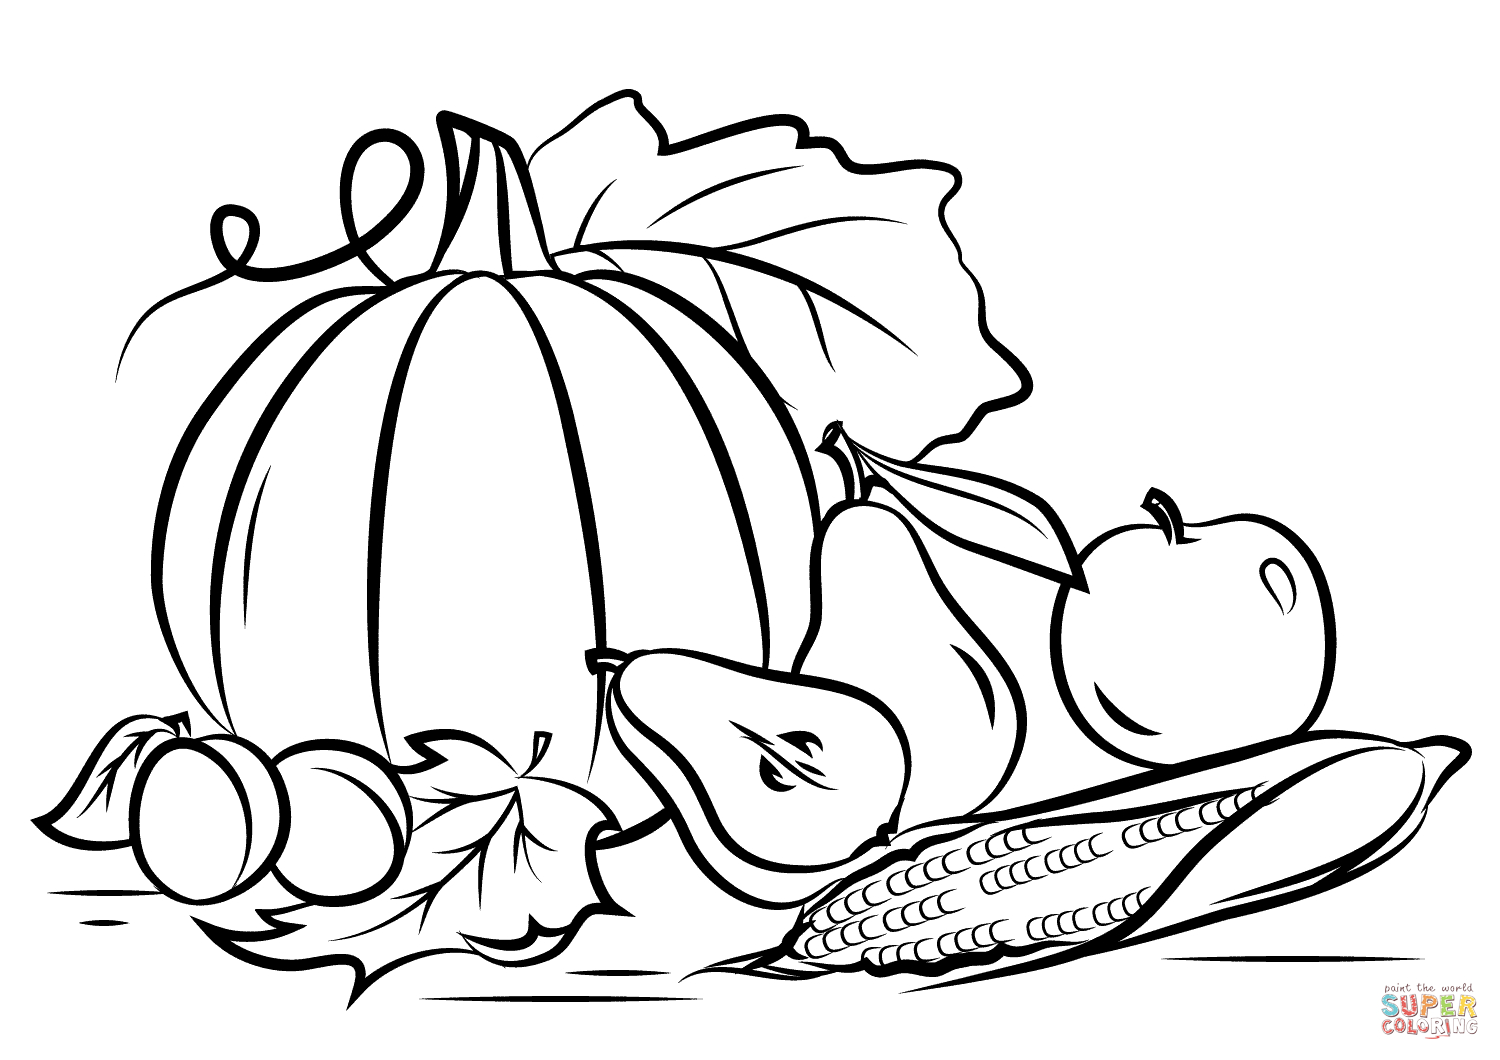 free-printable-fall-harvest-coloring-pages-free-printable